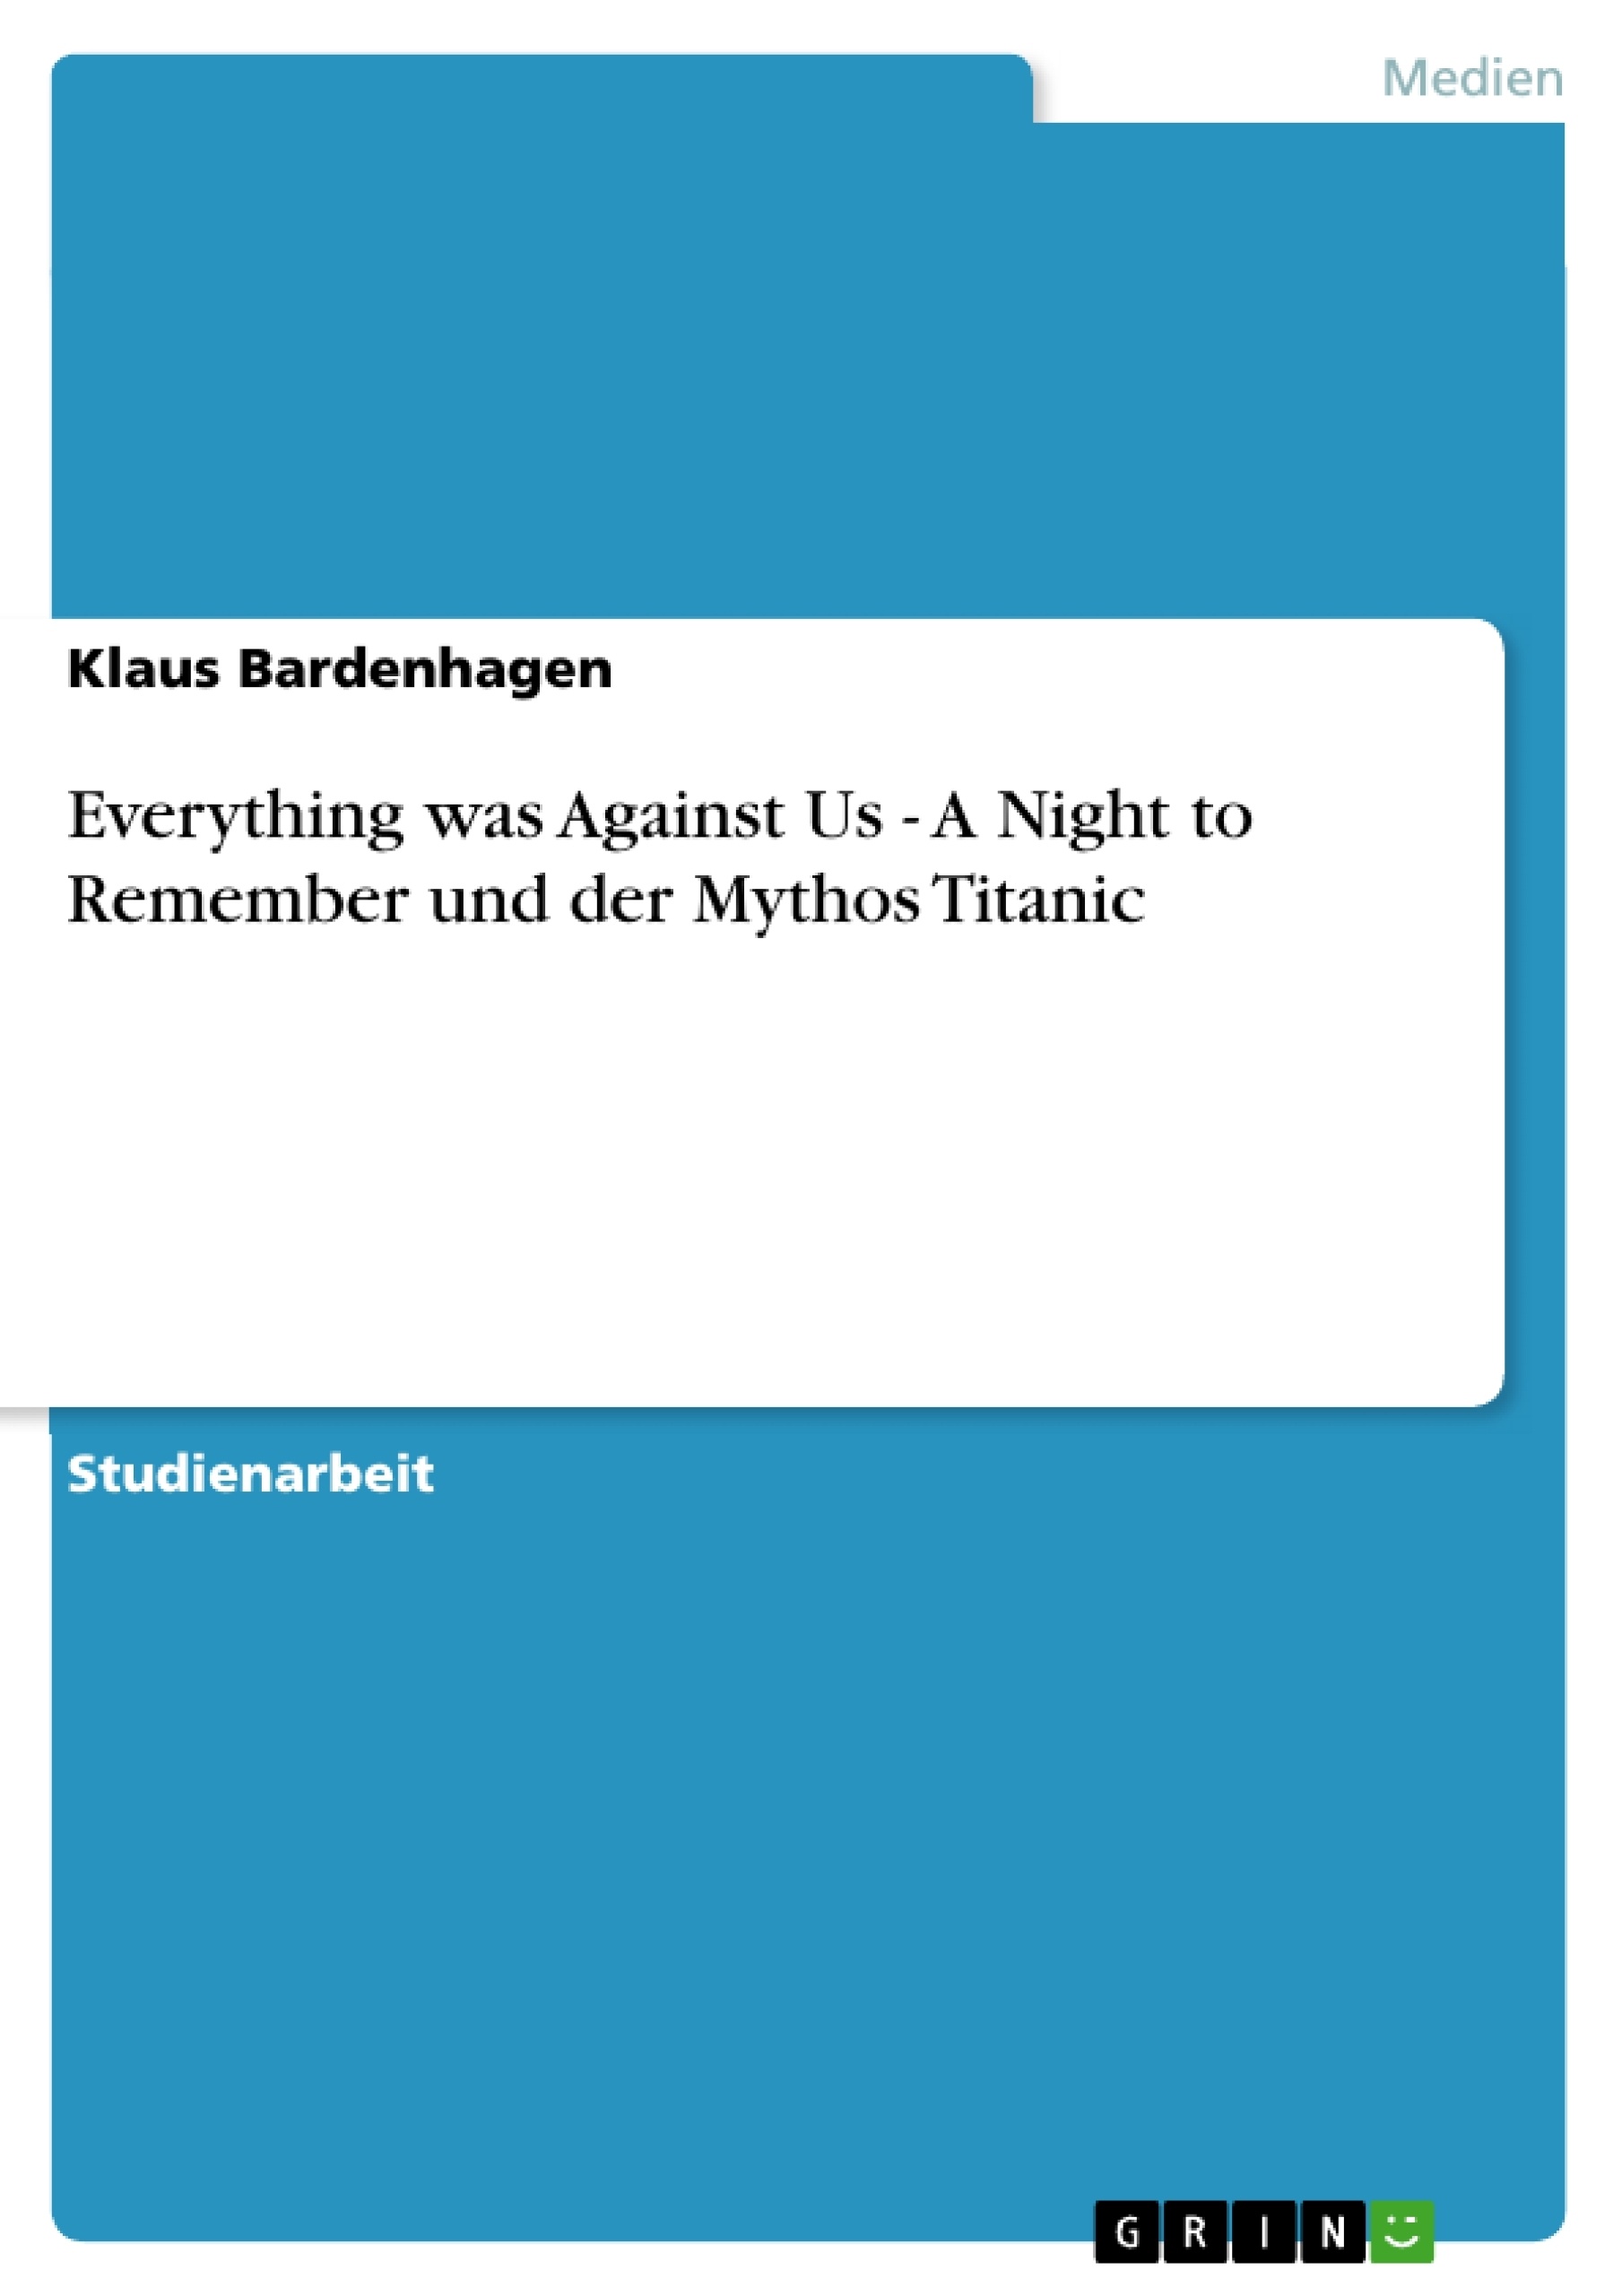 Title: Everything was Against Us - A Night to Remember und der Mythos Titanic